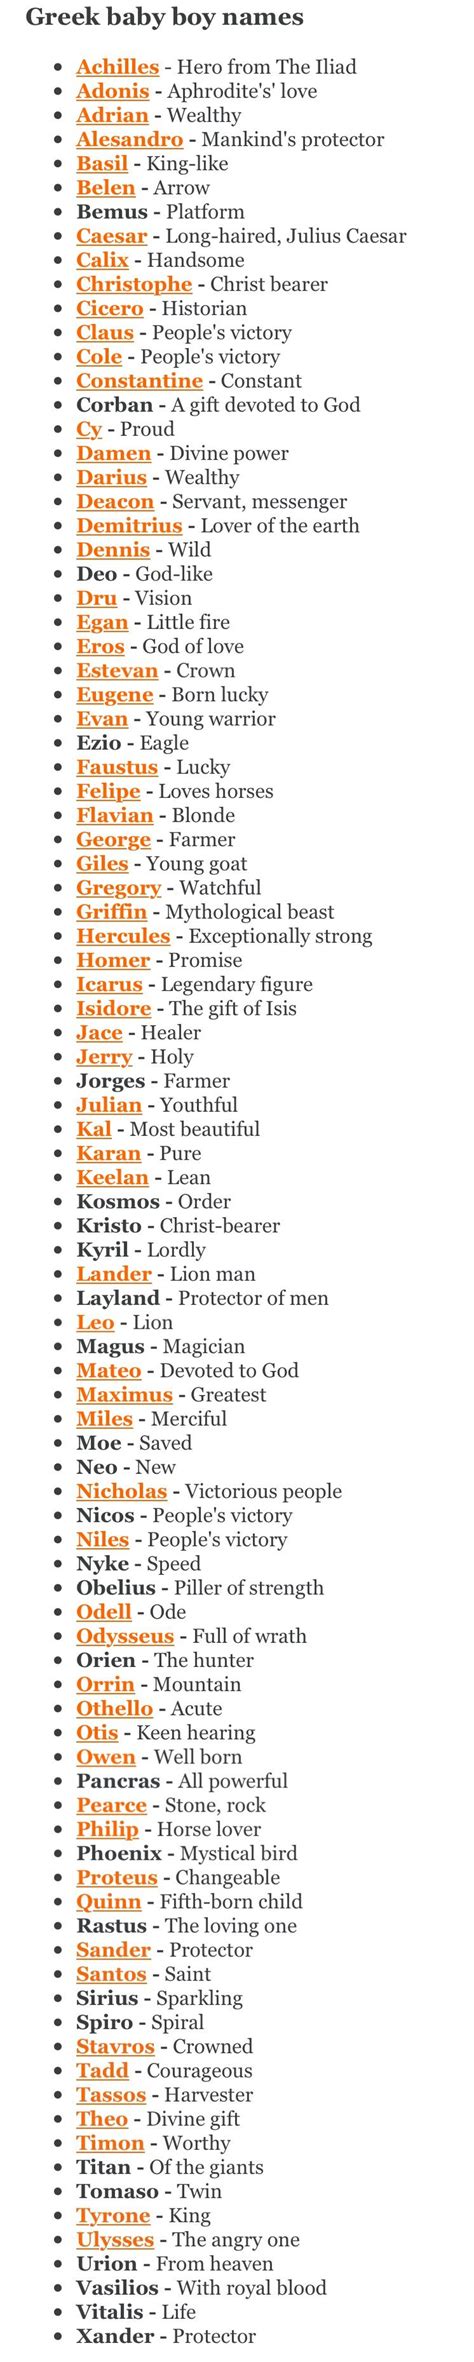 Pin by Maurice Jones on Writing 101 | Names, Names with meaning, Baby names